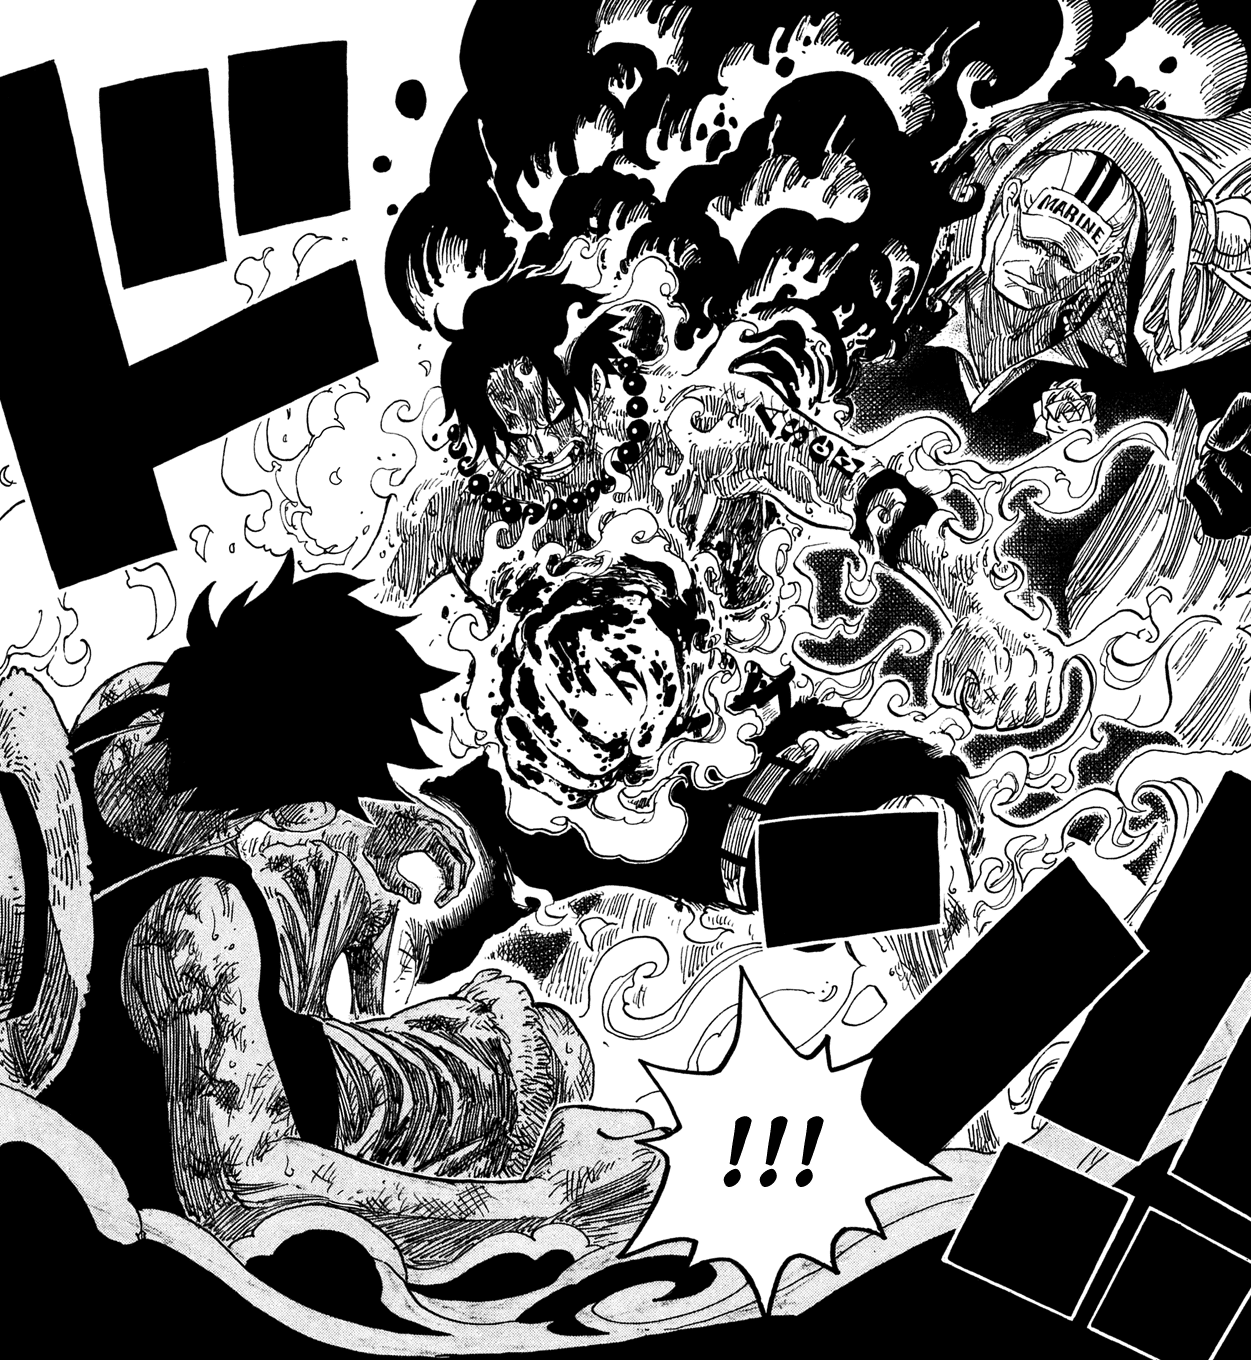 Portgas D Ace sacrifices himself to save his little brother luffy from admiral akainu in marineford war from one piece